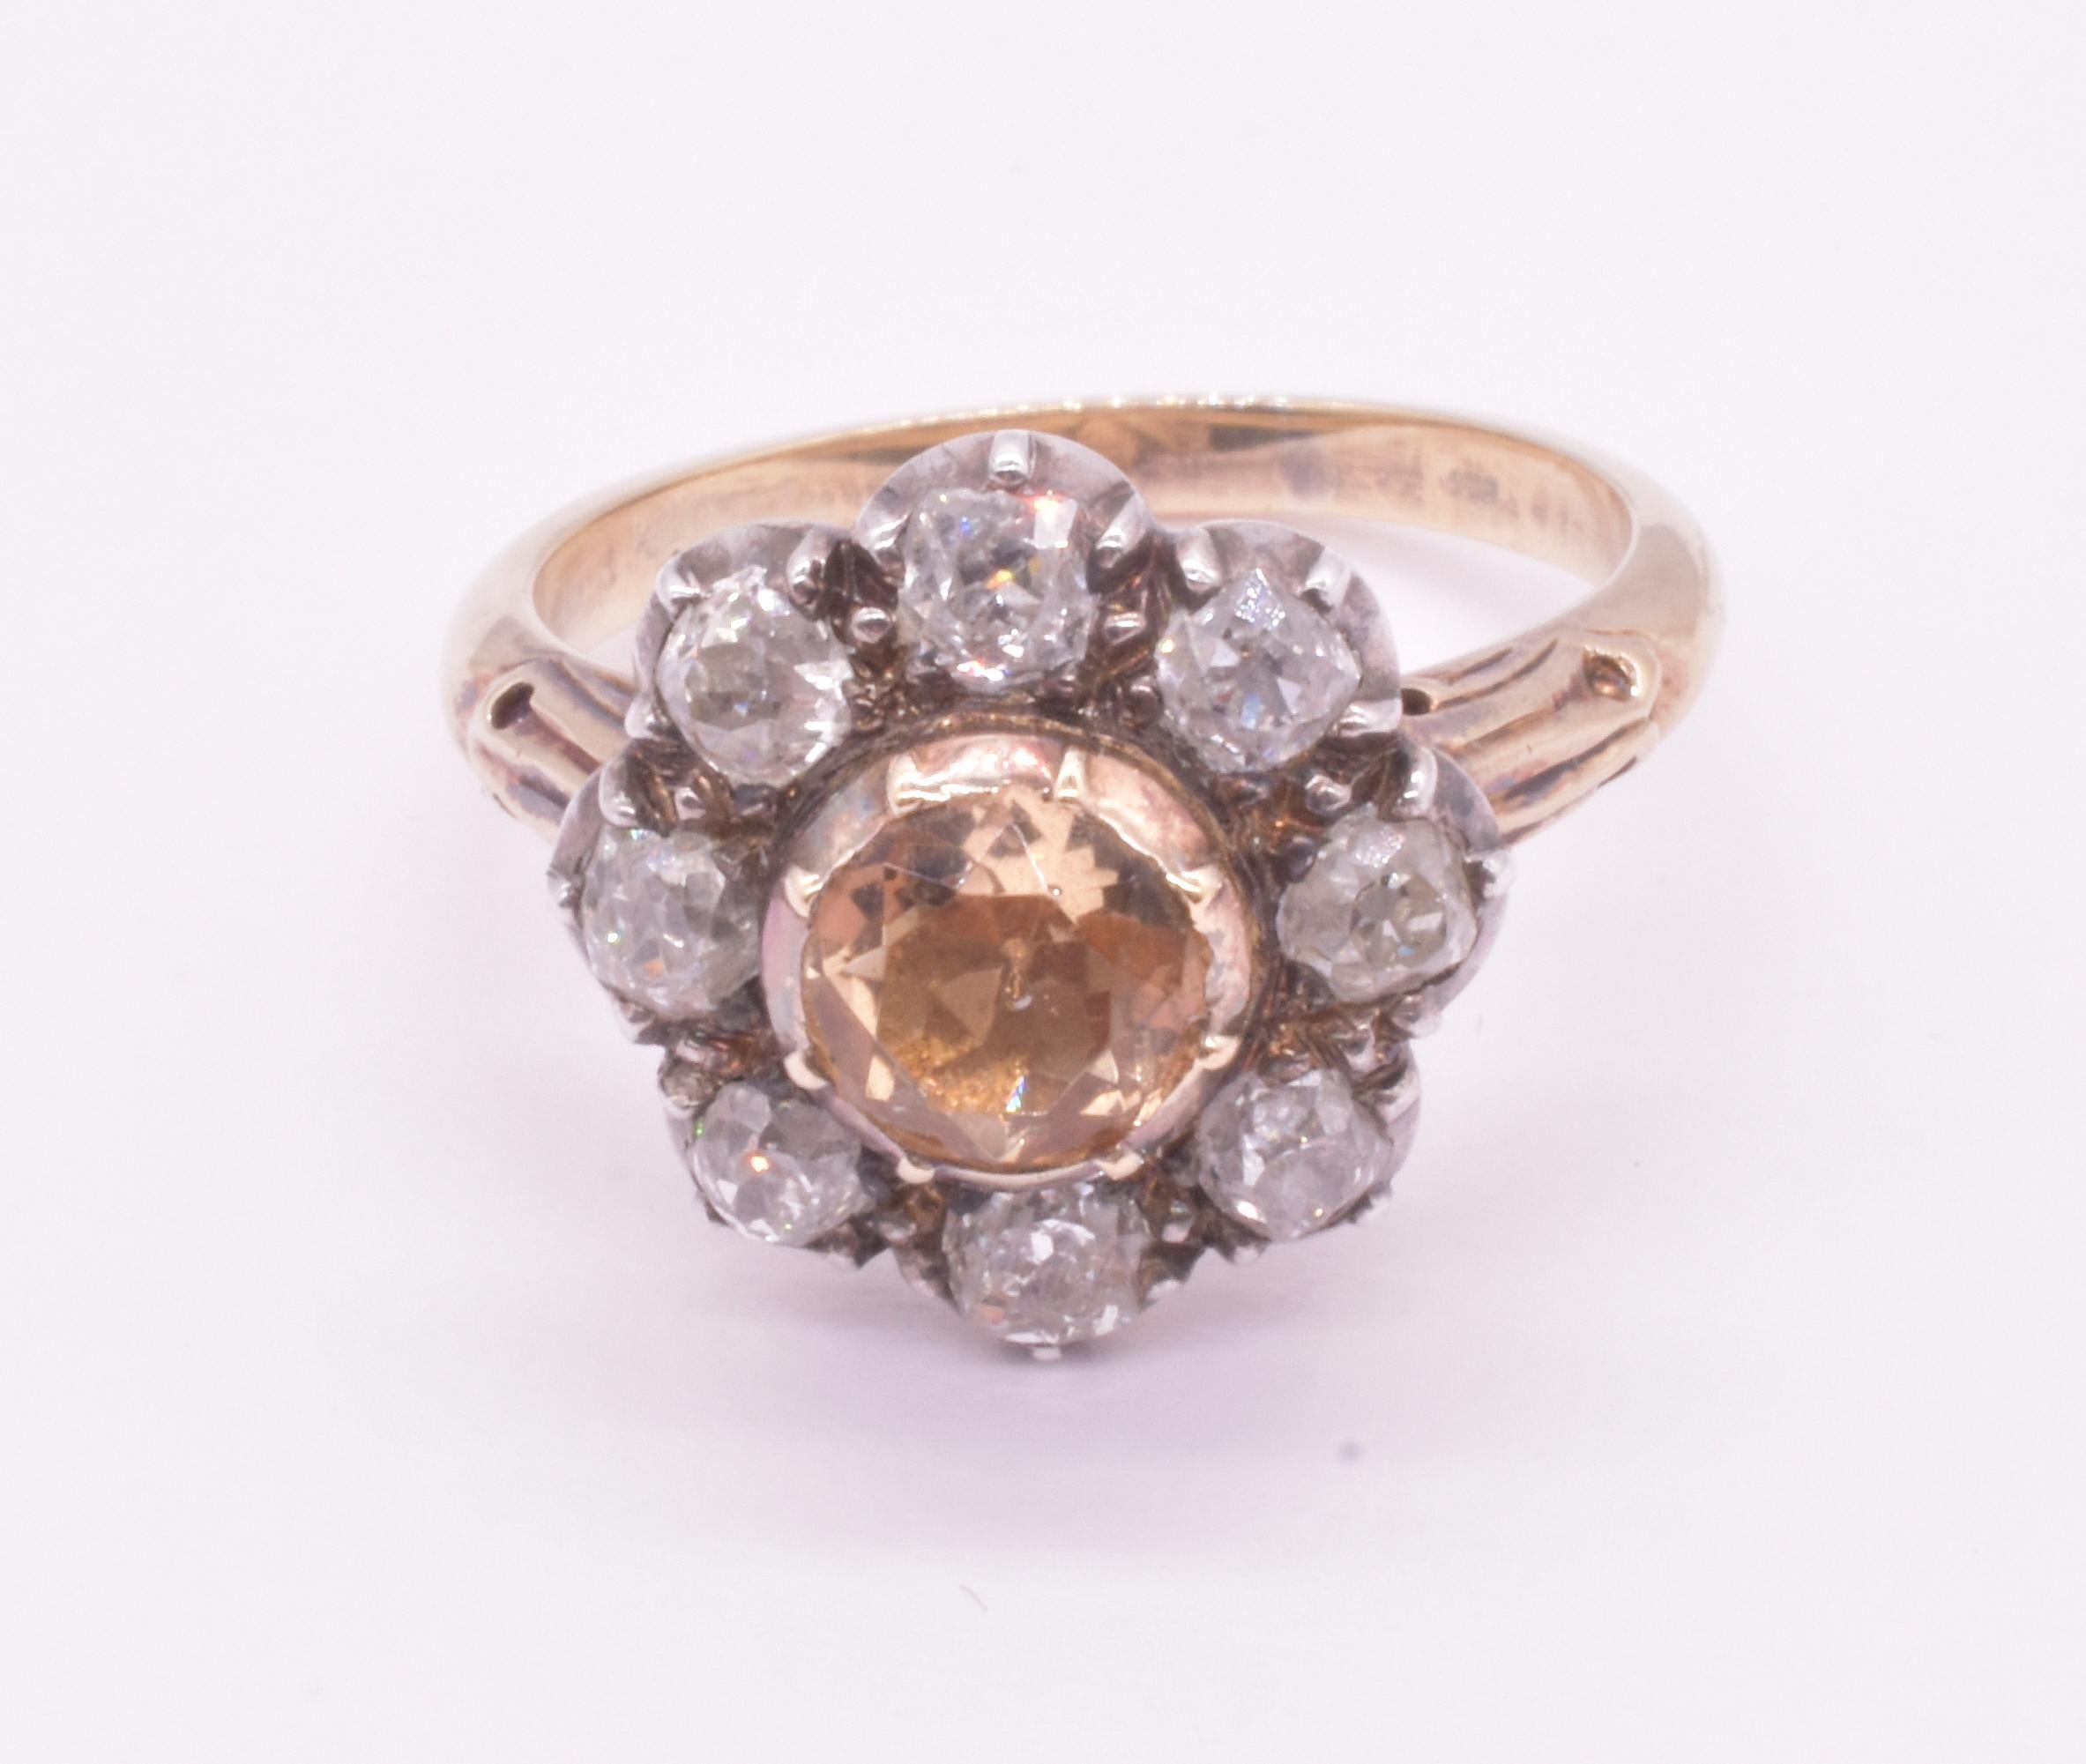 Substantial 18K C1840 diamond cluster ring with 8 round diamonds in a crimped collet setting surrounding a central natural gem, sherry brown topaz and hand set with a decorative band with carved flourishes along the shoulders. The gem topaz was